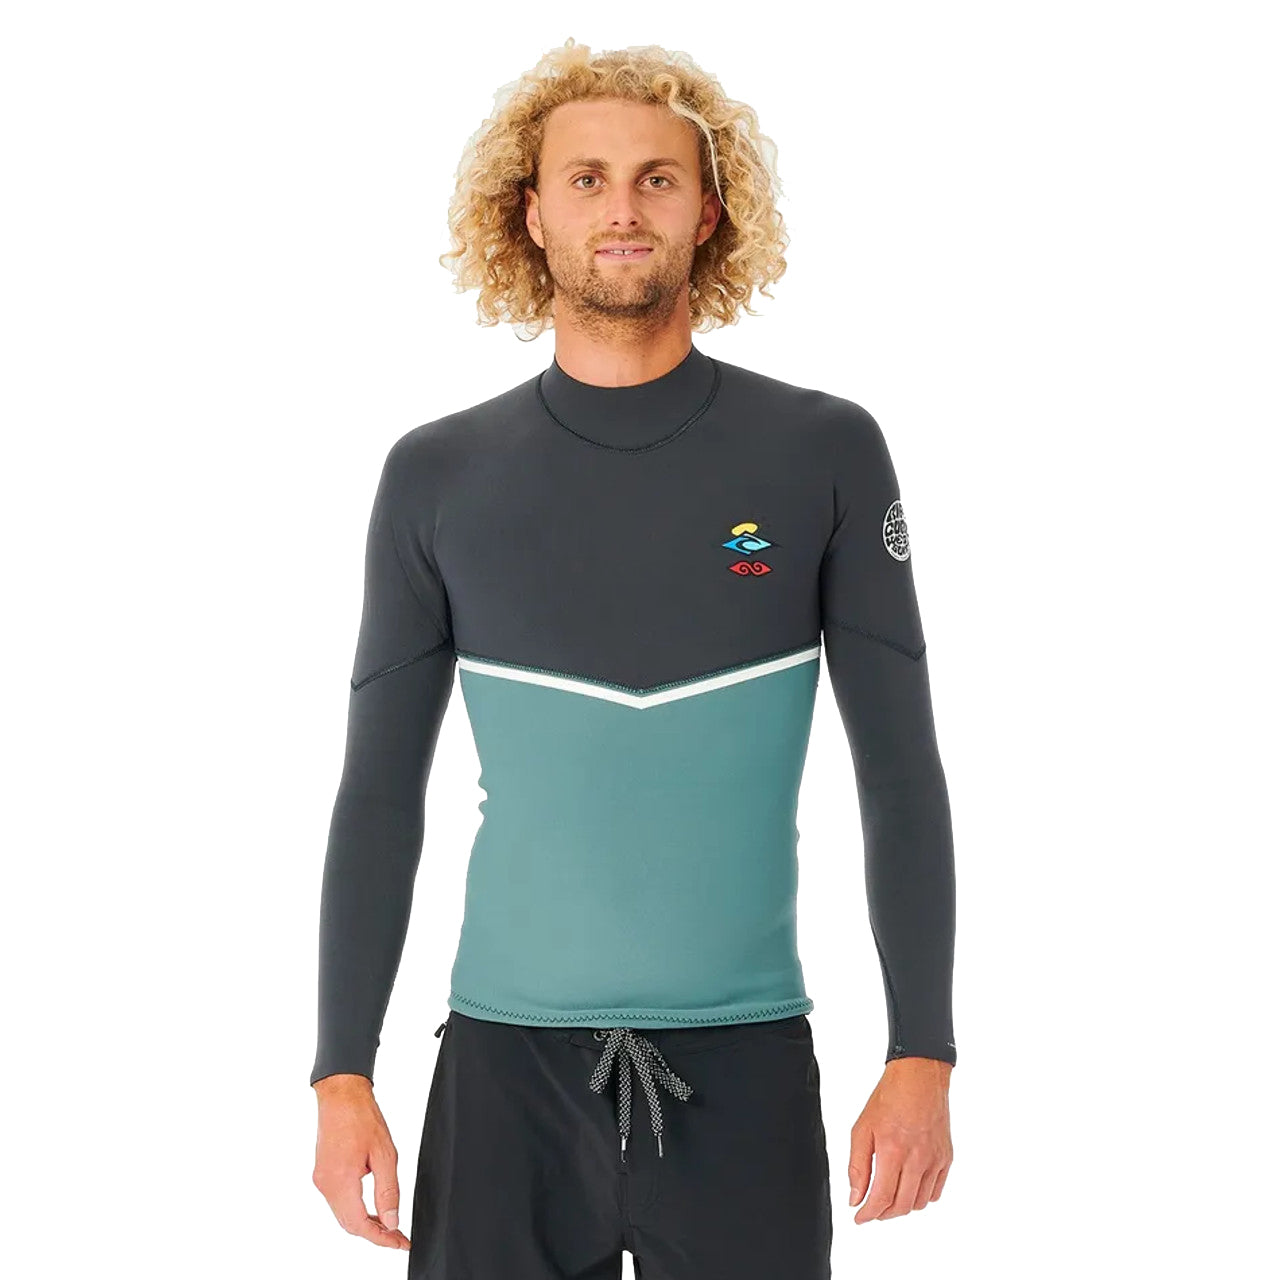 Rip Curl E-Bomb Search 1.5mm LS GB Wetsuit Jacket 8088-Muted Green M